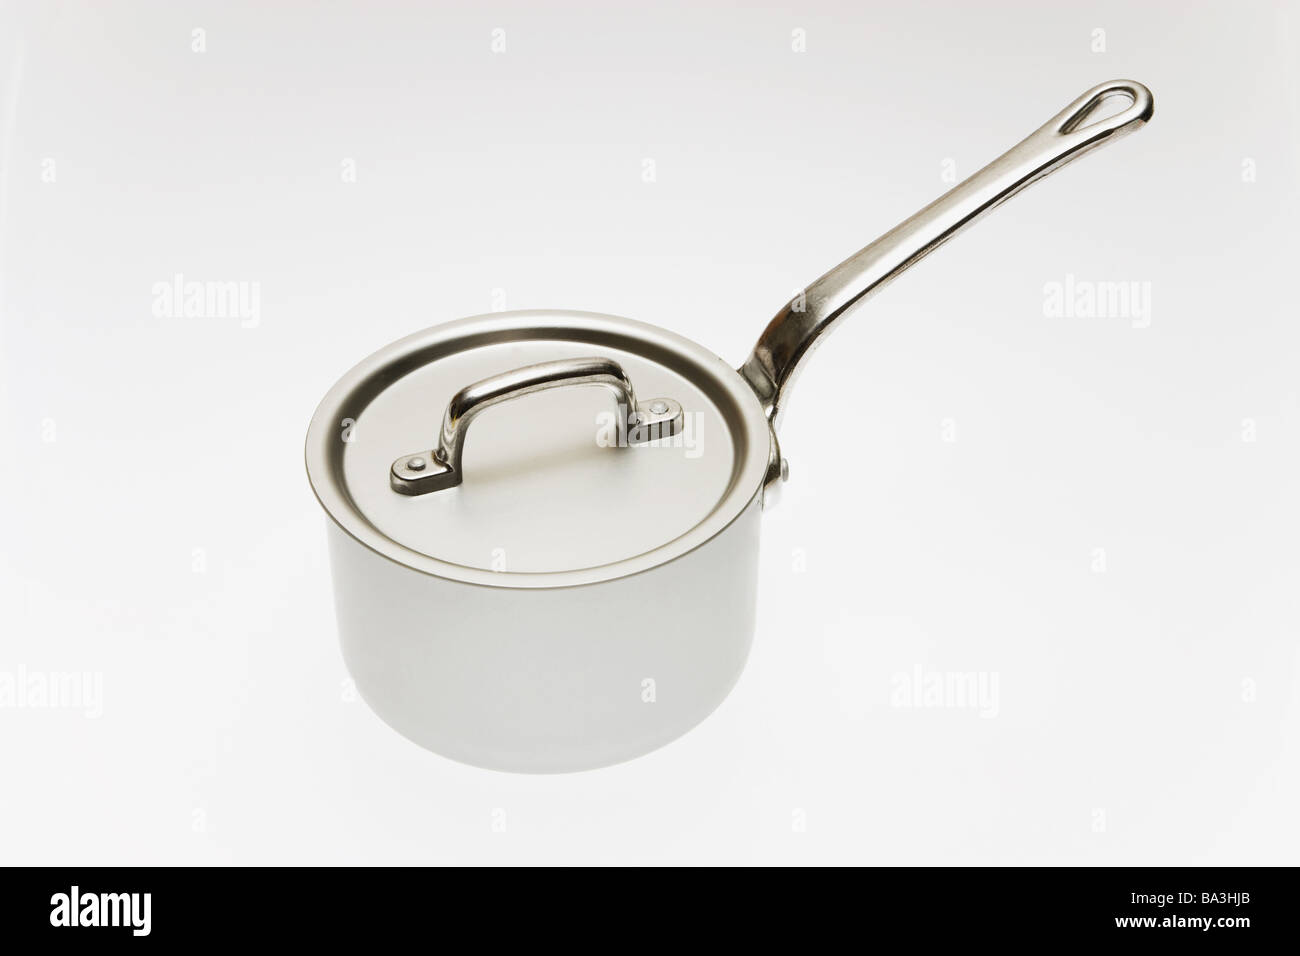 Pan with Lid on White Background Stock Photo